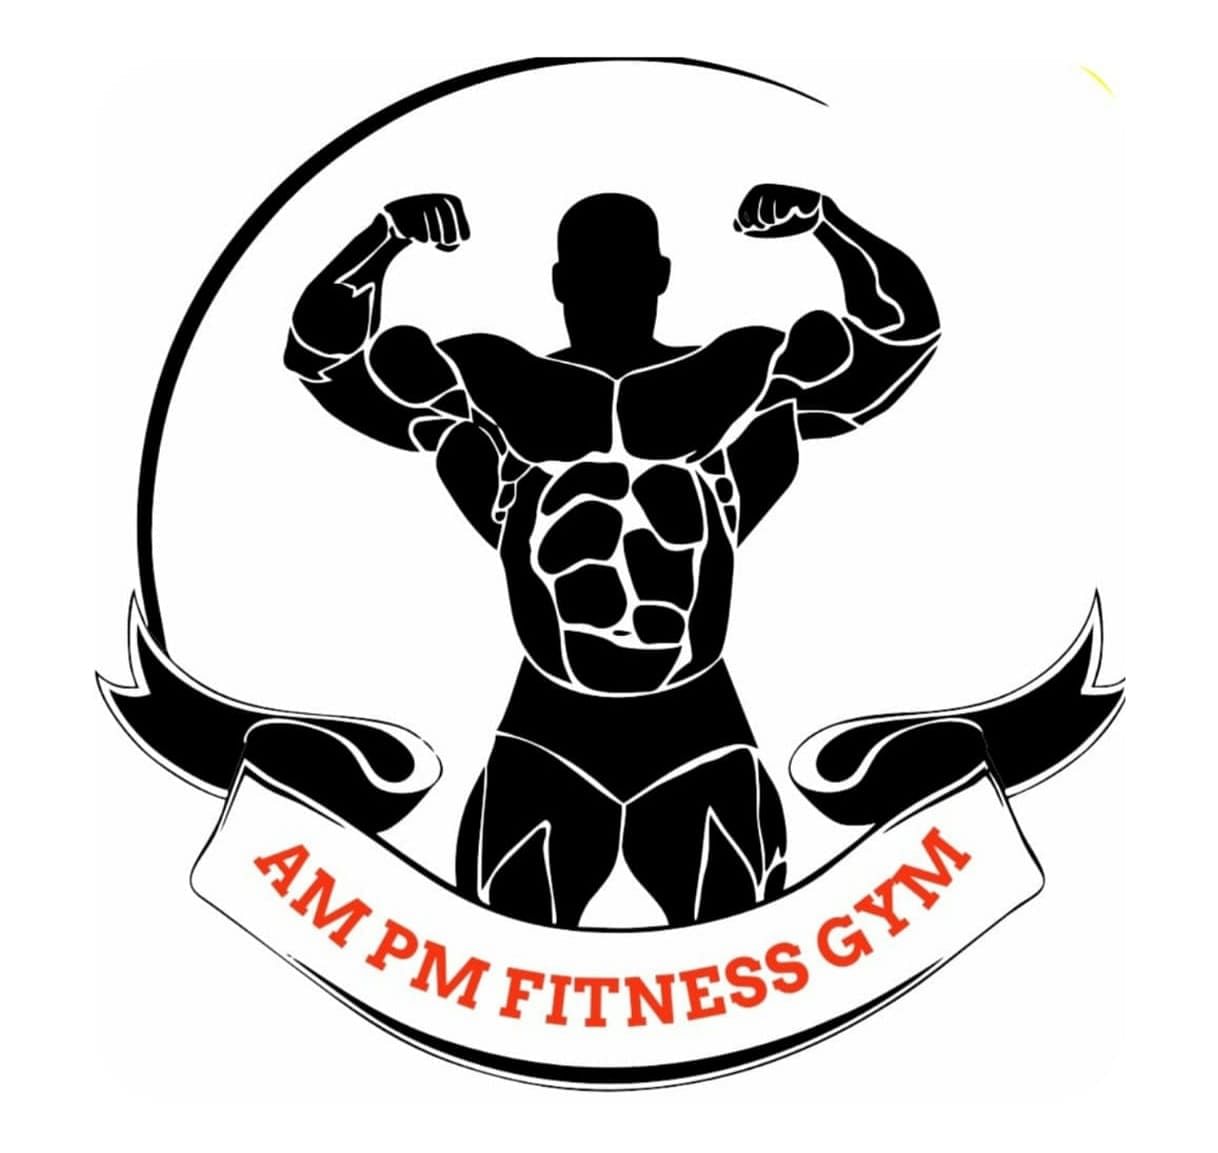 Am Pm Fitness Gym